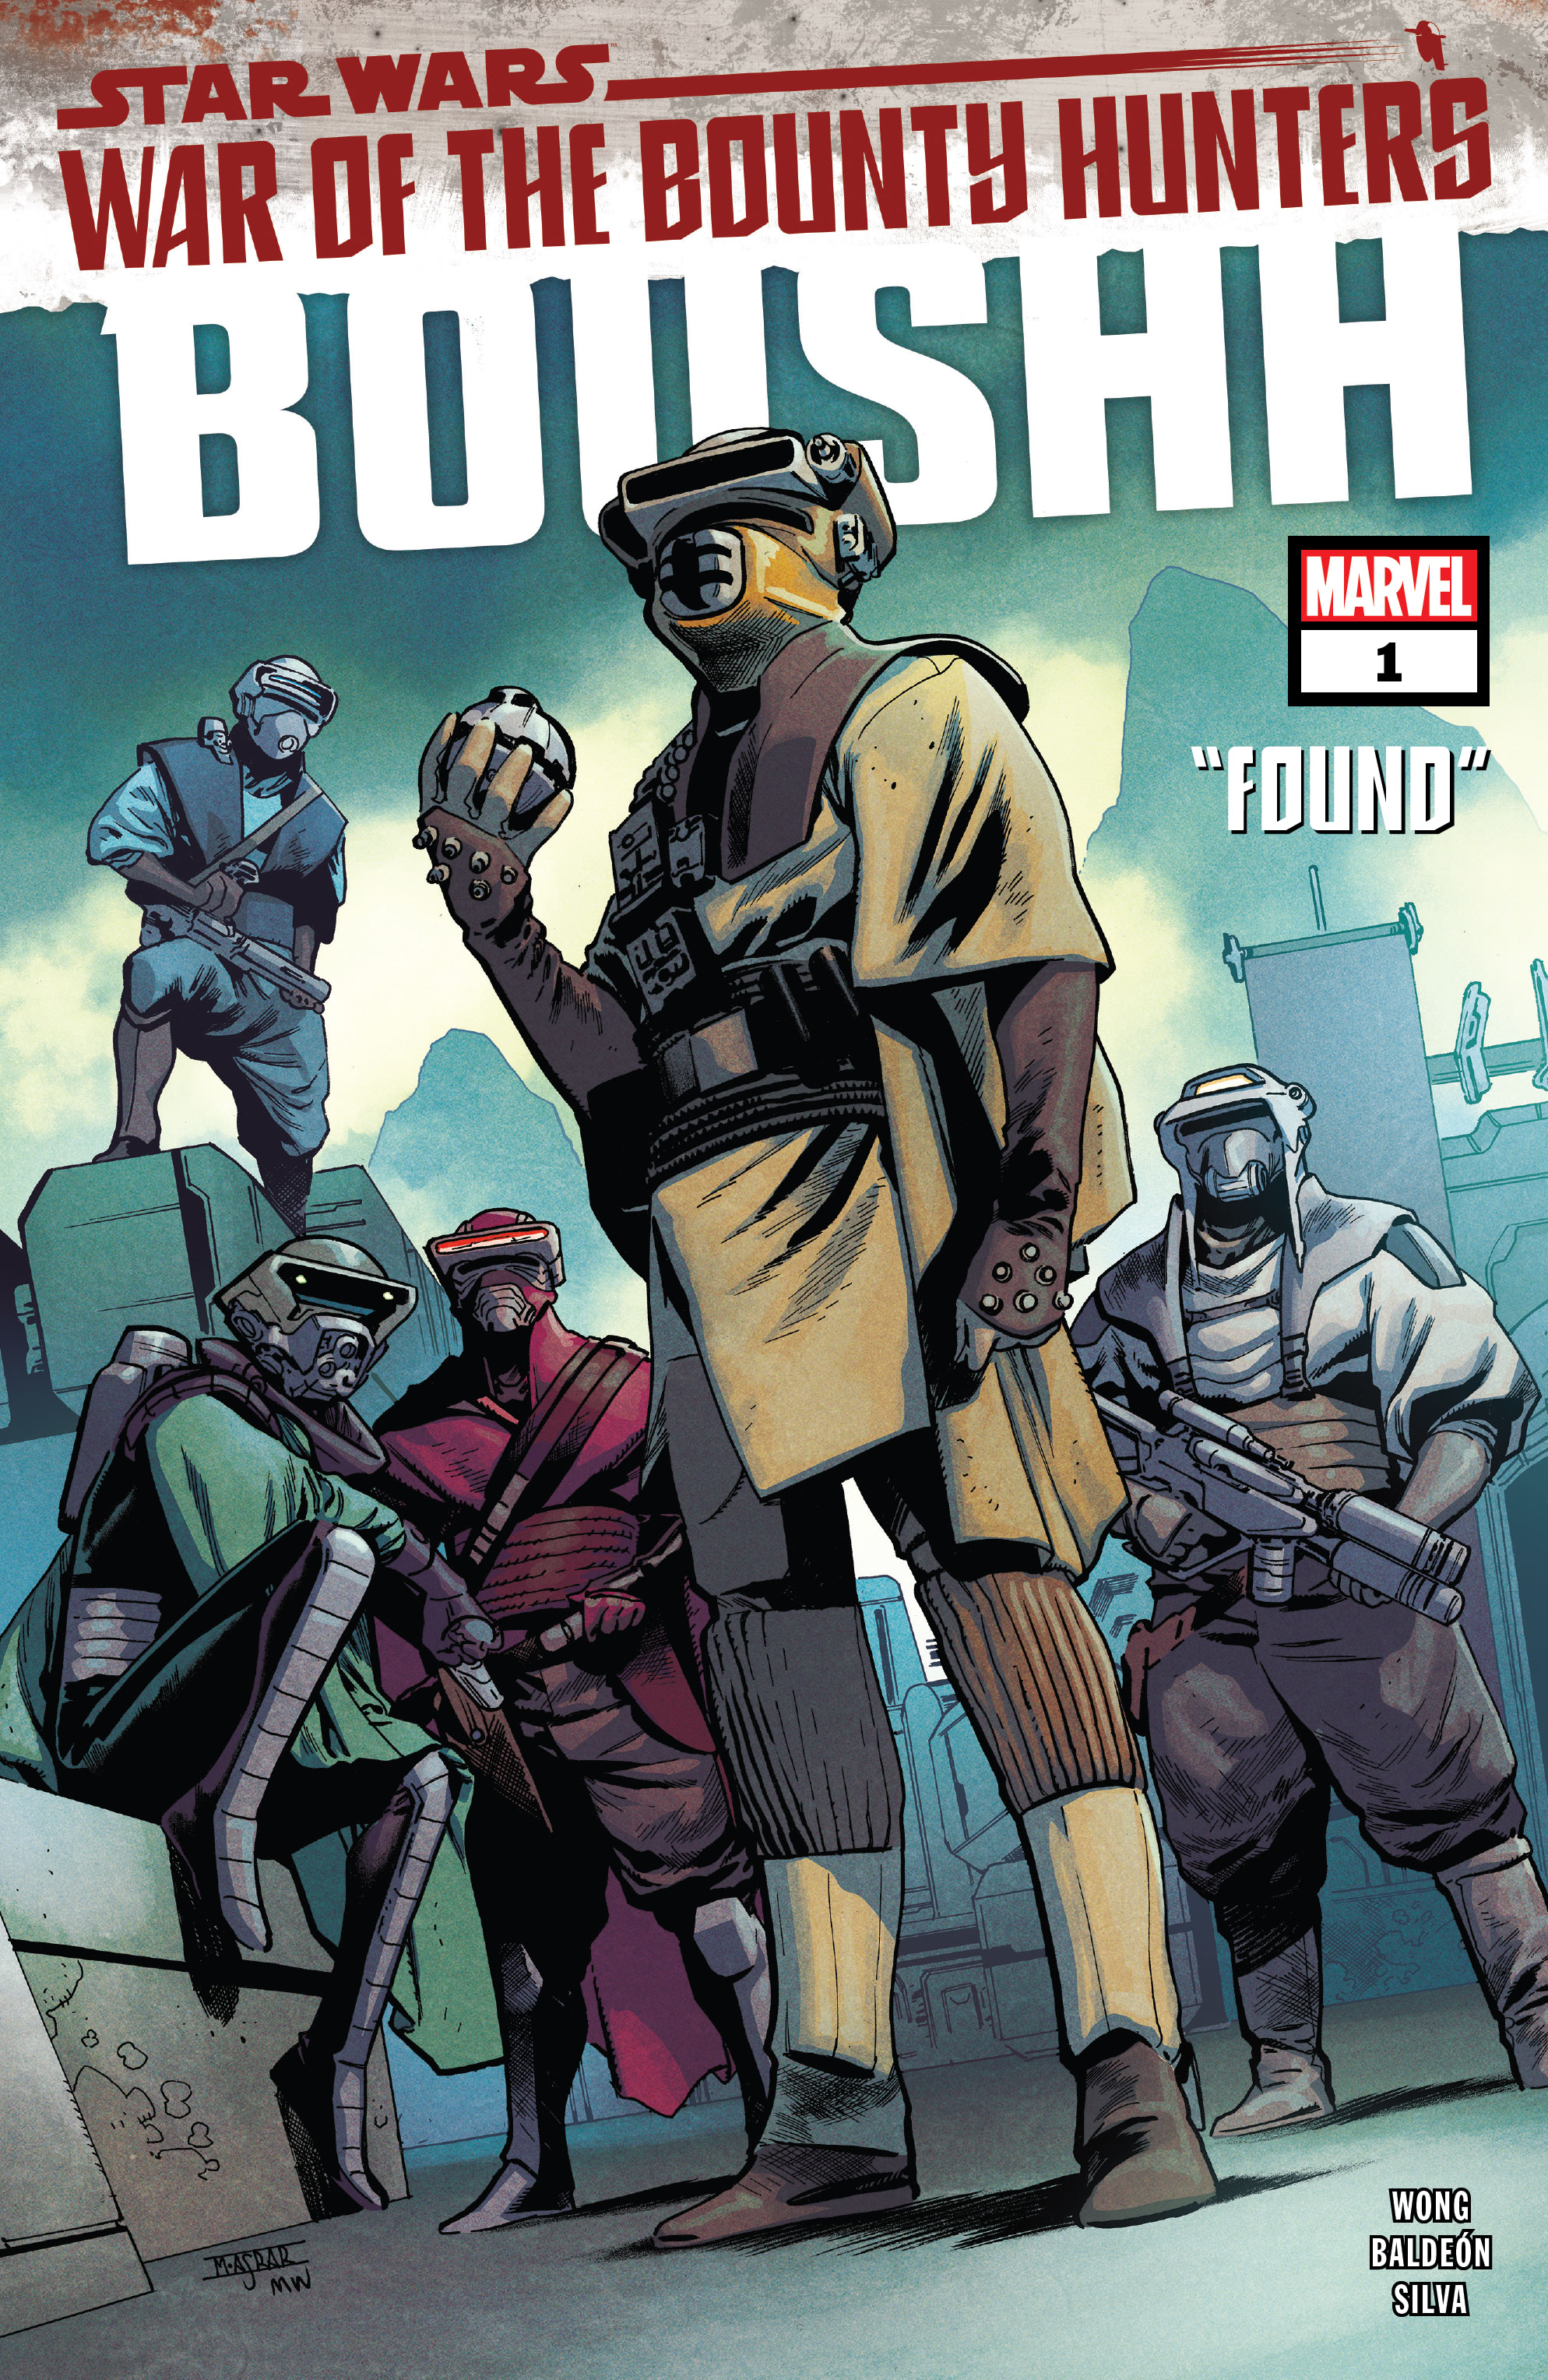 Star Wars: War of the Bounty Hunters - Boushh (2021): Chapter 1 - Page 1